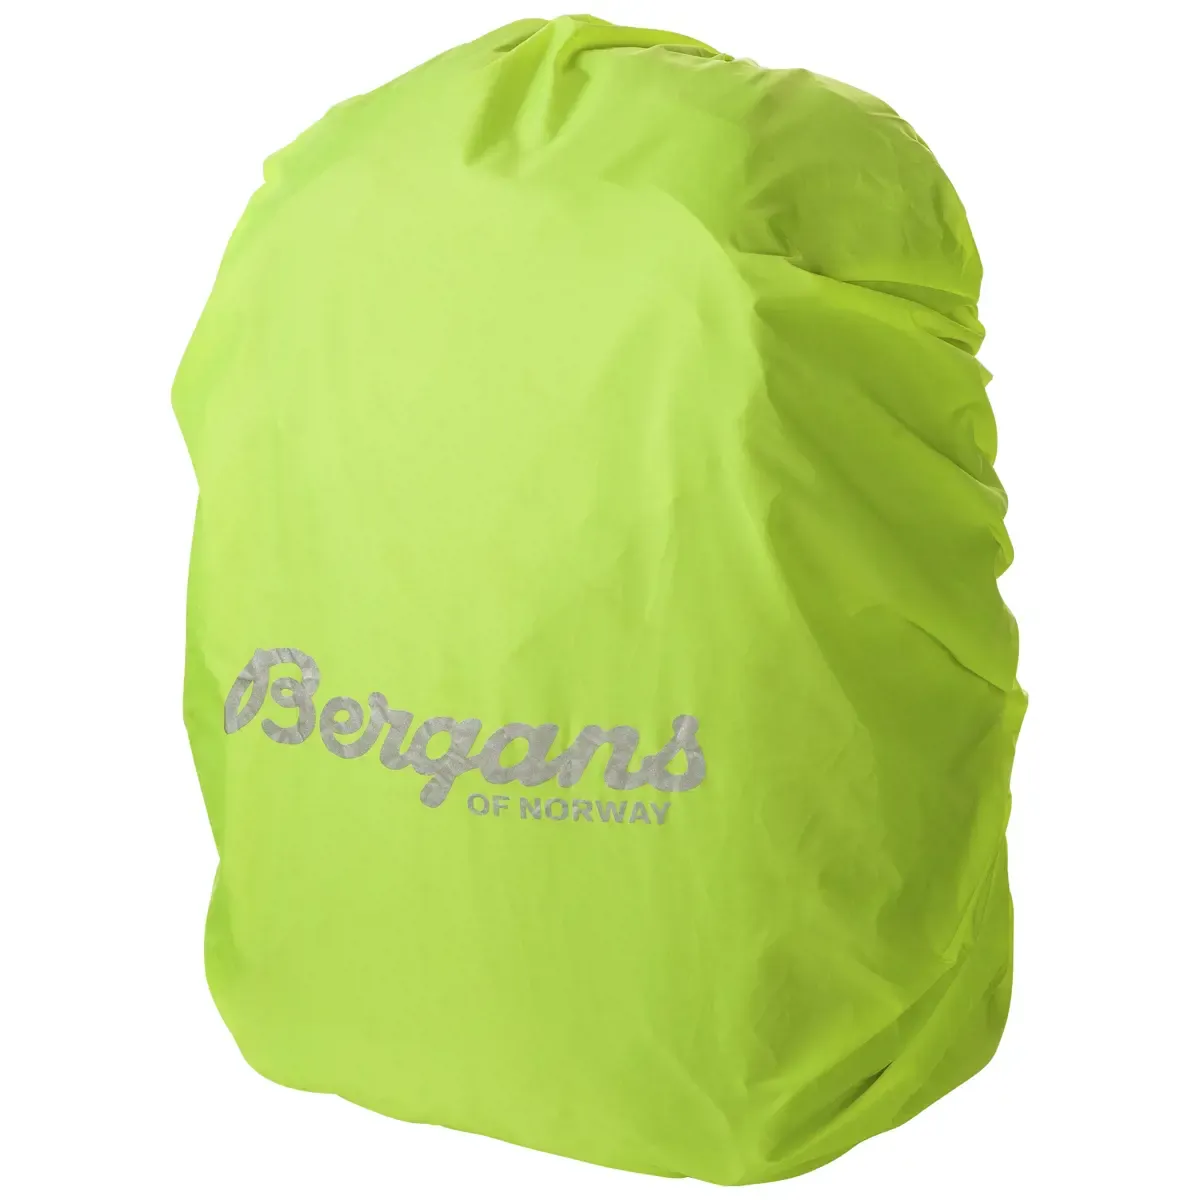 bergans-of-norway-raincover-small-for-schoolbag-neon-yellow